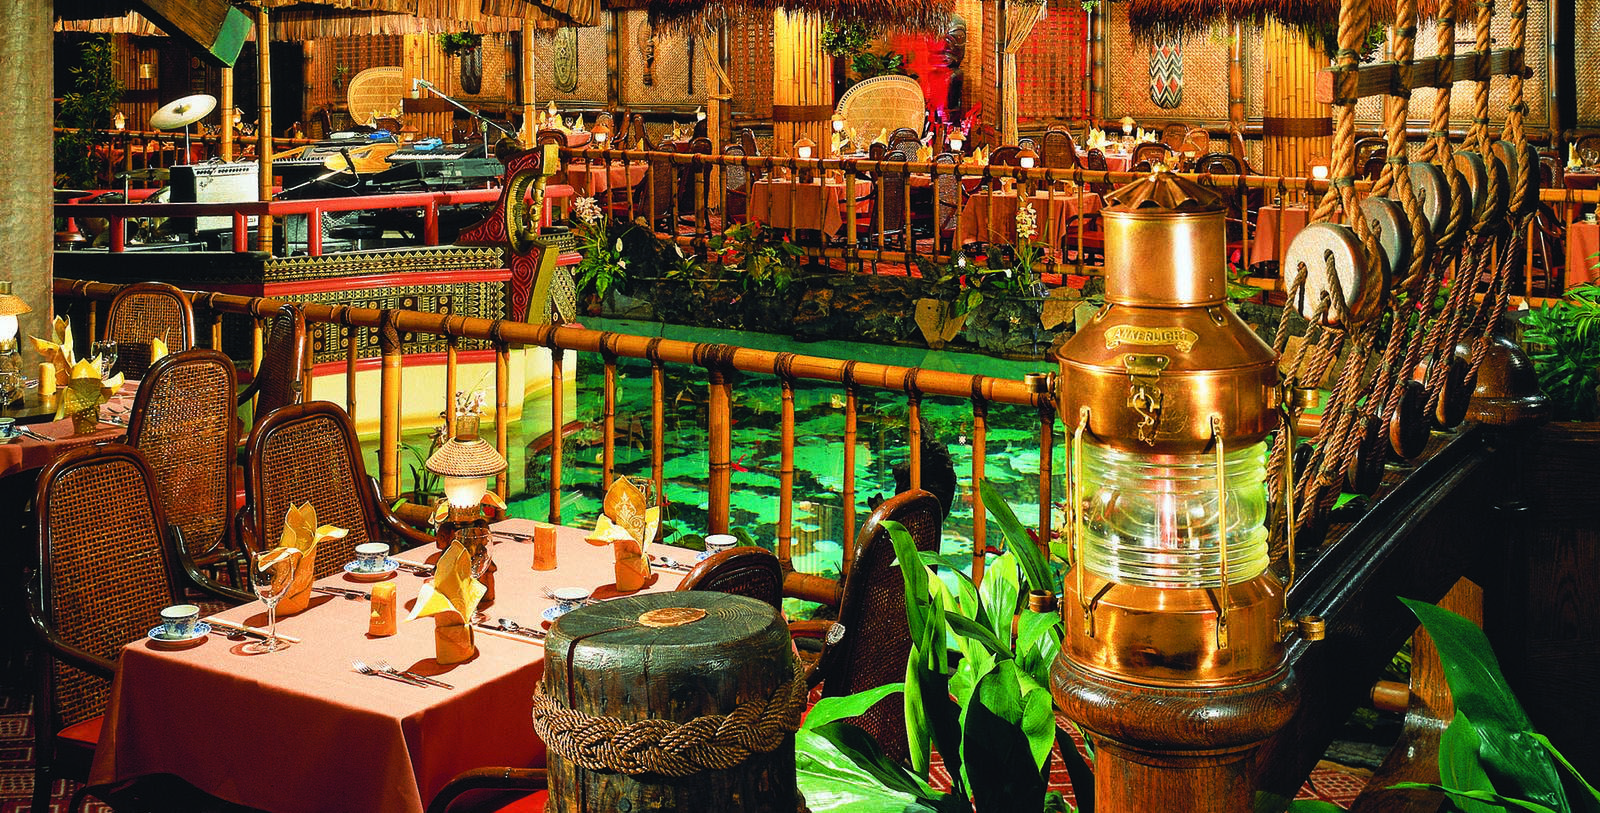 Taste Polynesian-fusion, family-style cuisine in the unique tropical setting of the hotel’s Tonga Room & Hurricane Bar, the longest continually operating Tiki venue in North America.